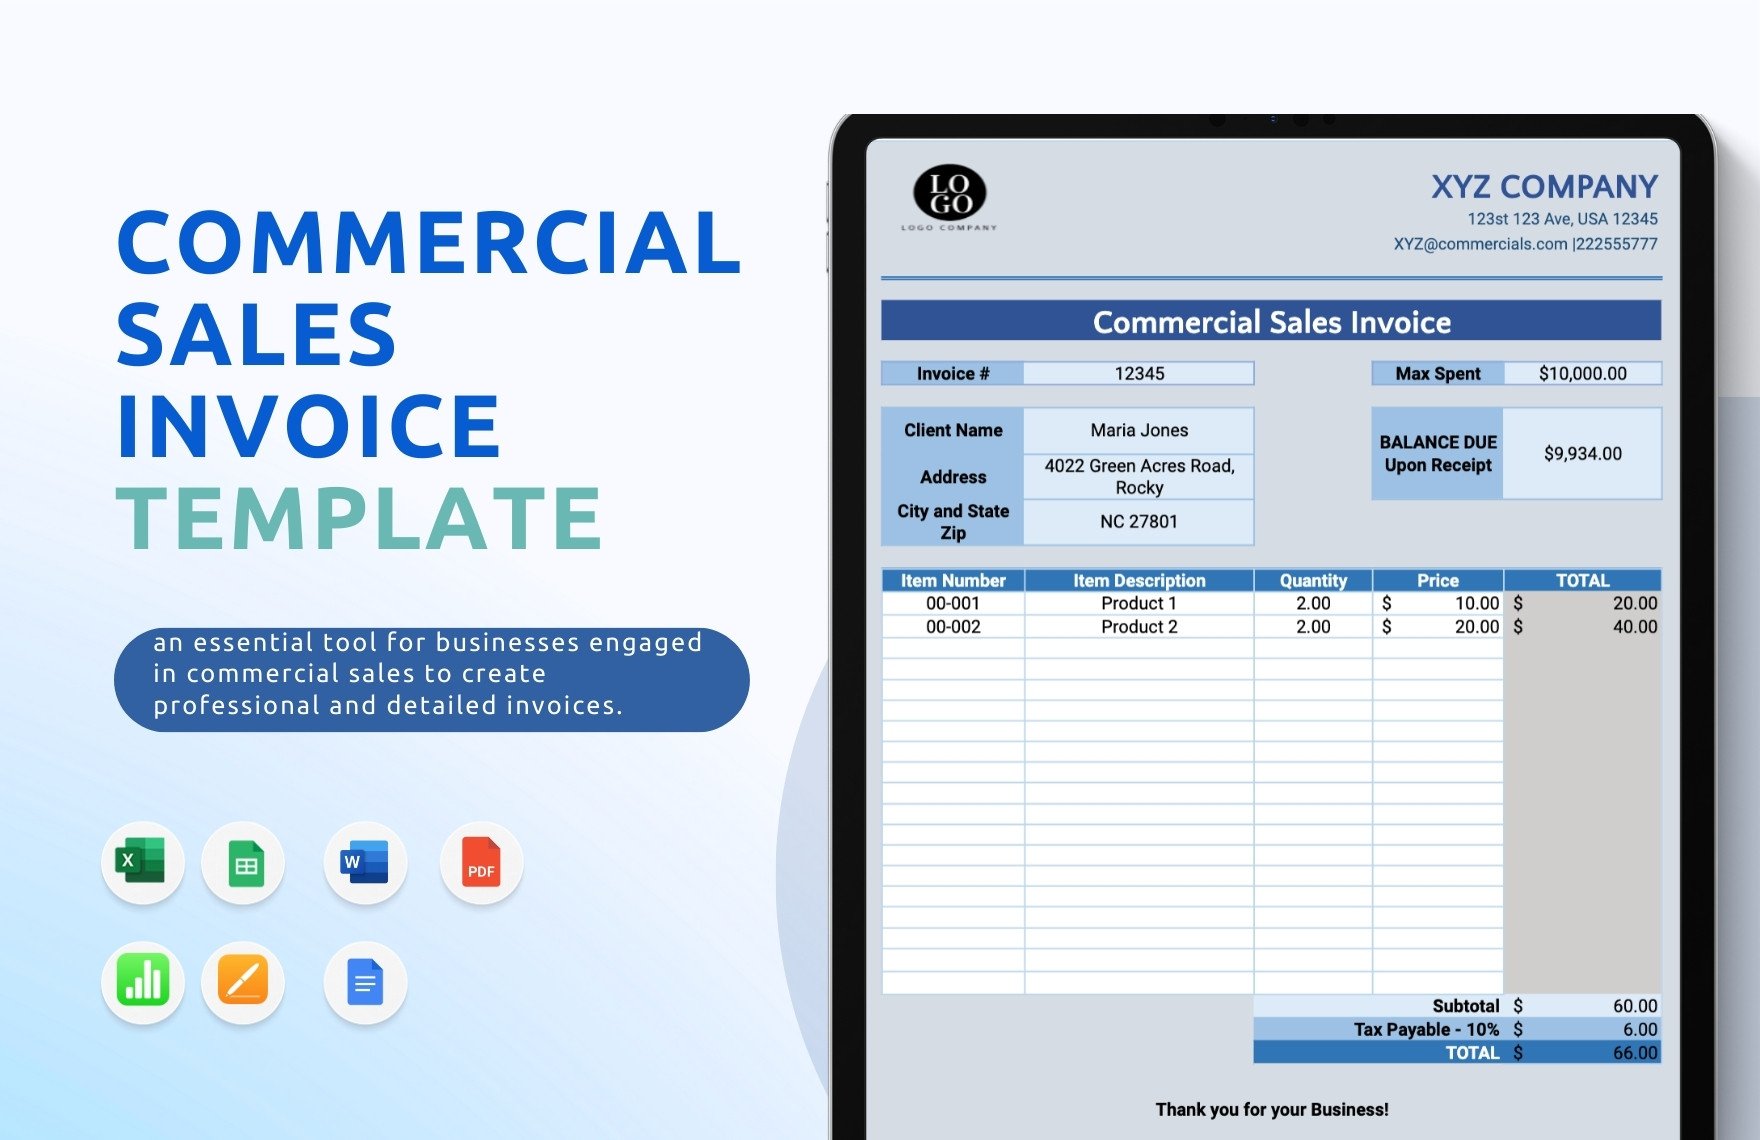 Commercial Sales Invoice Template in Word, Google Docs, Excel, PDF, Google Sheets, Apple Pages, Apple Numbers